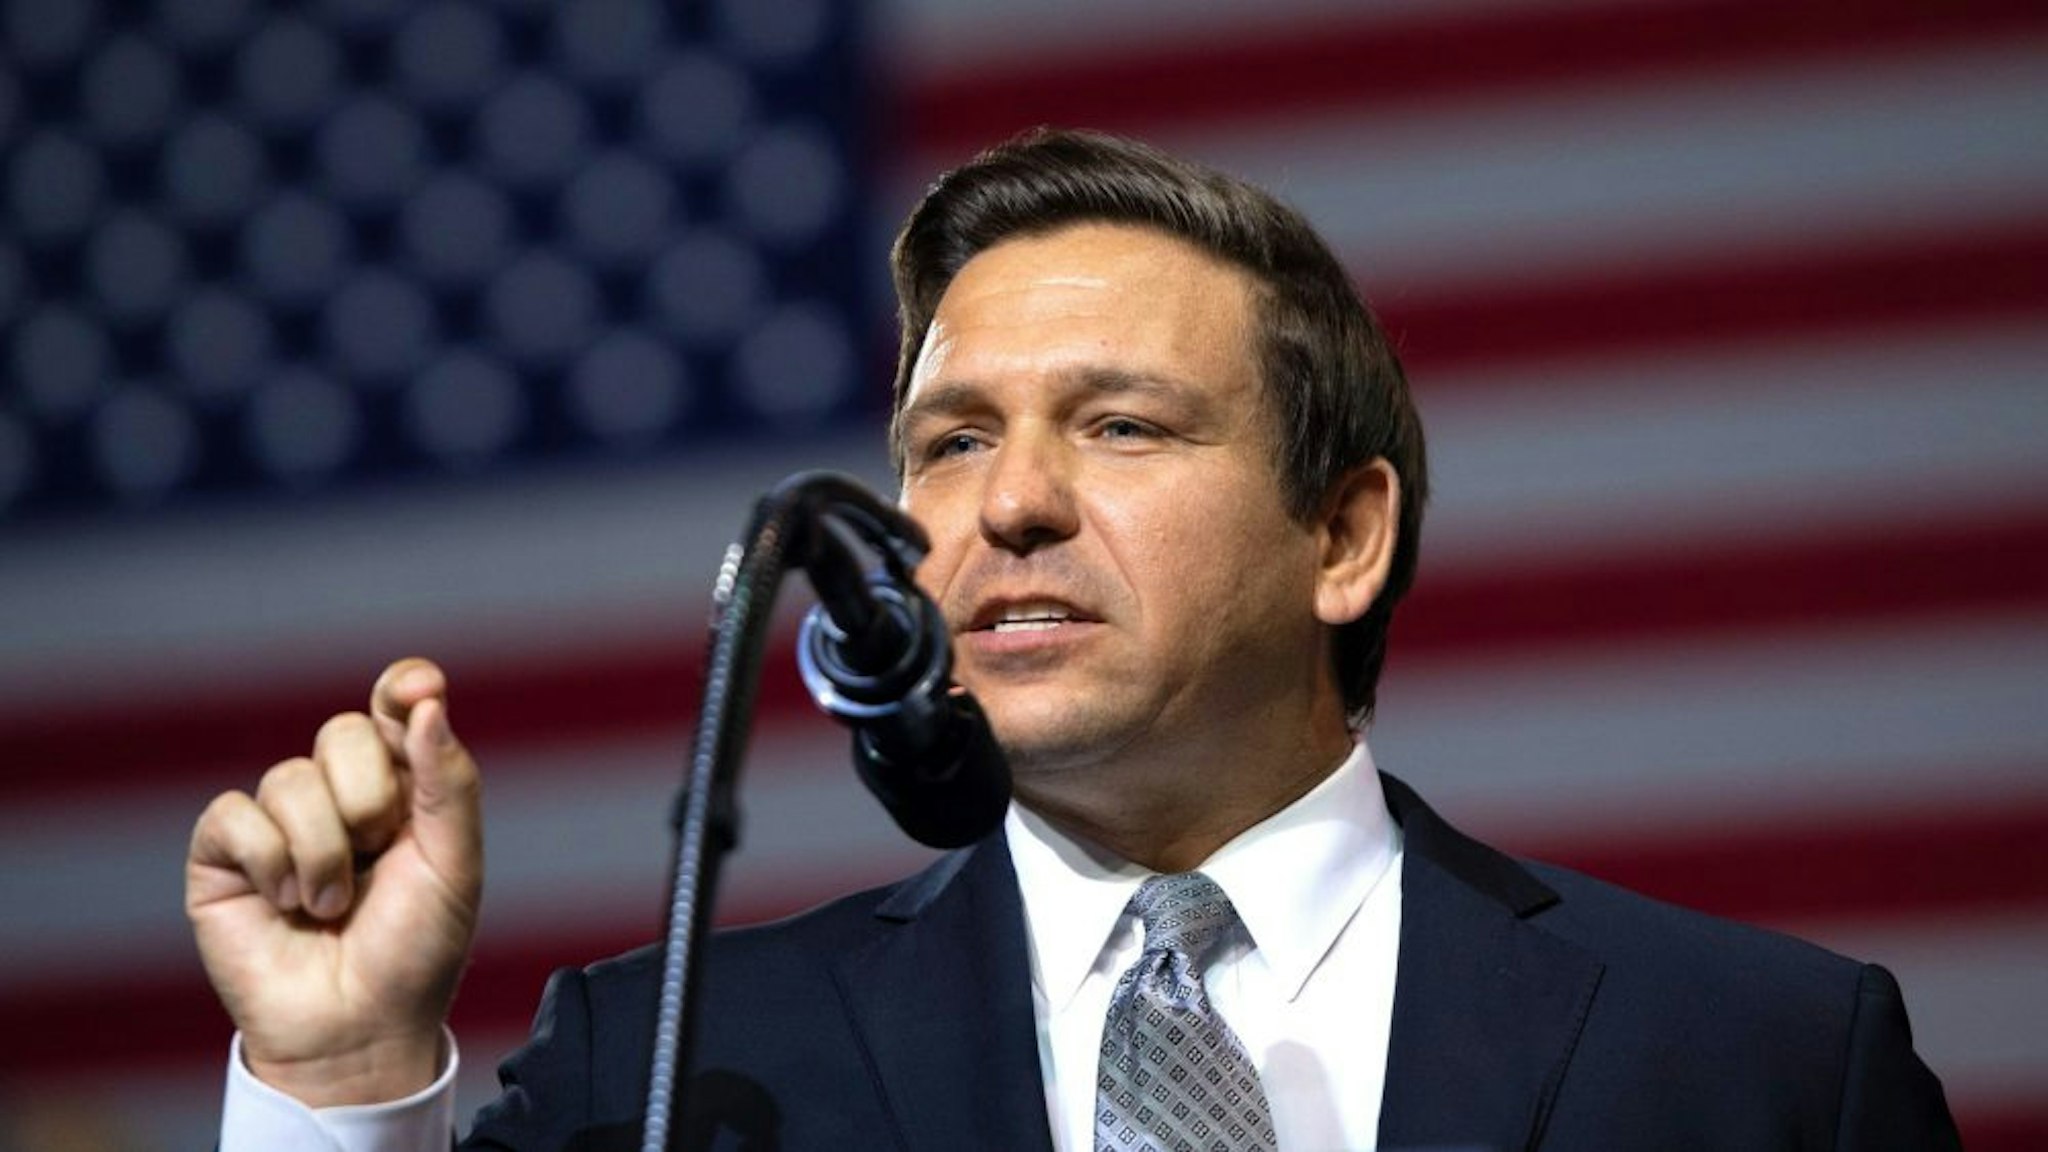 US Representative Ron DeSantis, Republican of Florida, and candidate for Florida Governor, speaks during a rally with US President Donald Trump at Florida State Fairgrounds Expo Hall in Tampa, Florida, on July 31, 2018.